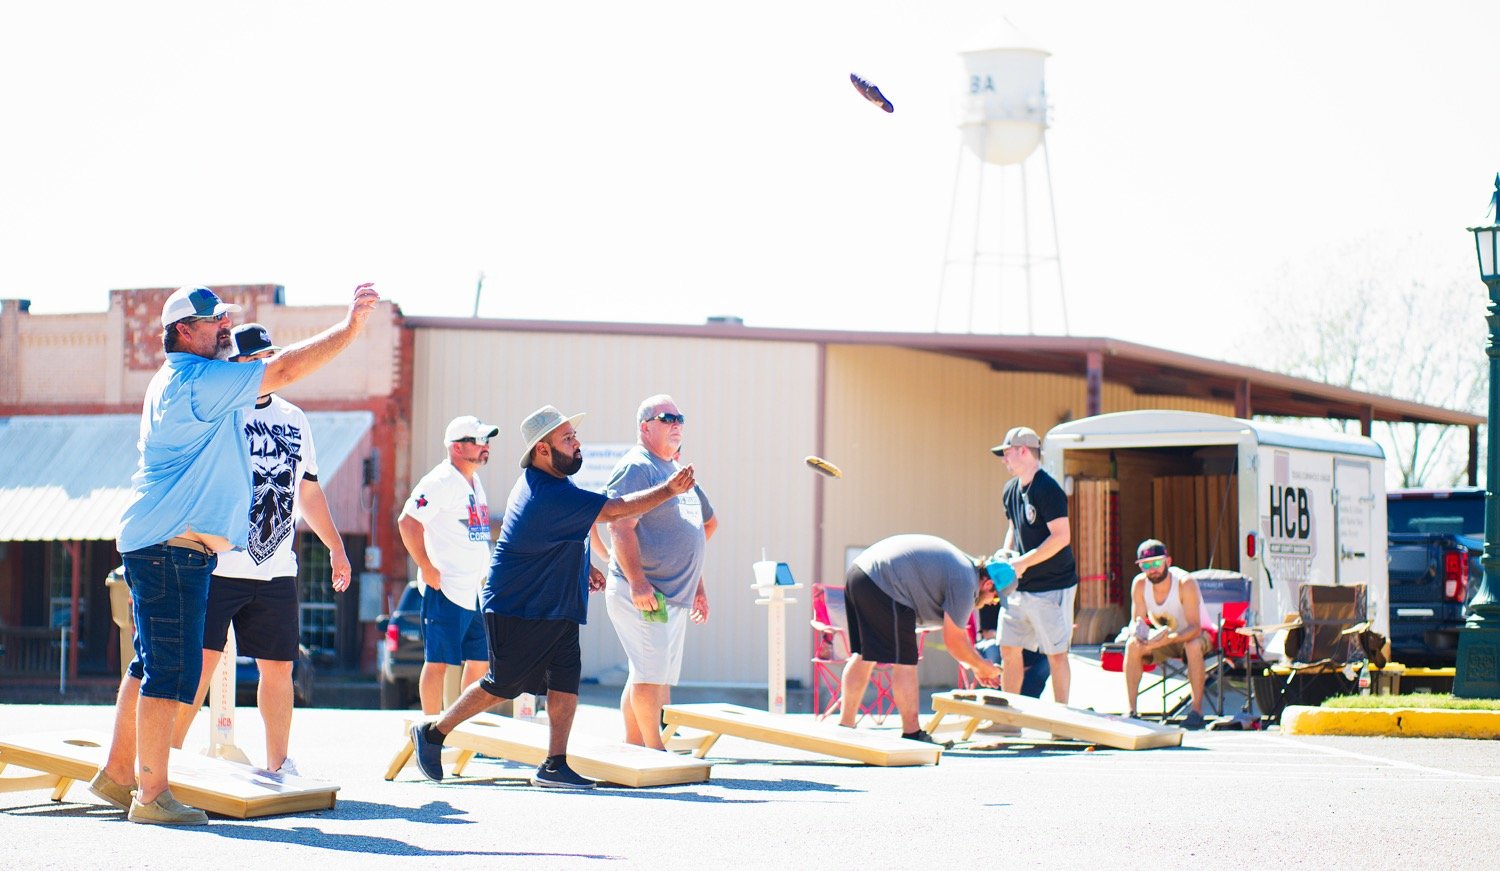 Dozens of competitors threw bags in downtown Alba on Saturday in a fundraising cornhole tournament for the Alba Volunteer Fire Dept. put on by Hunt County Baggers. [Bag a print.]